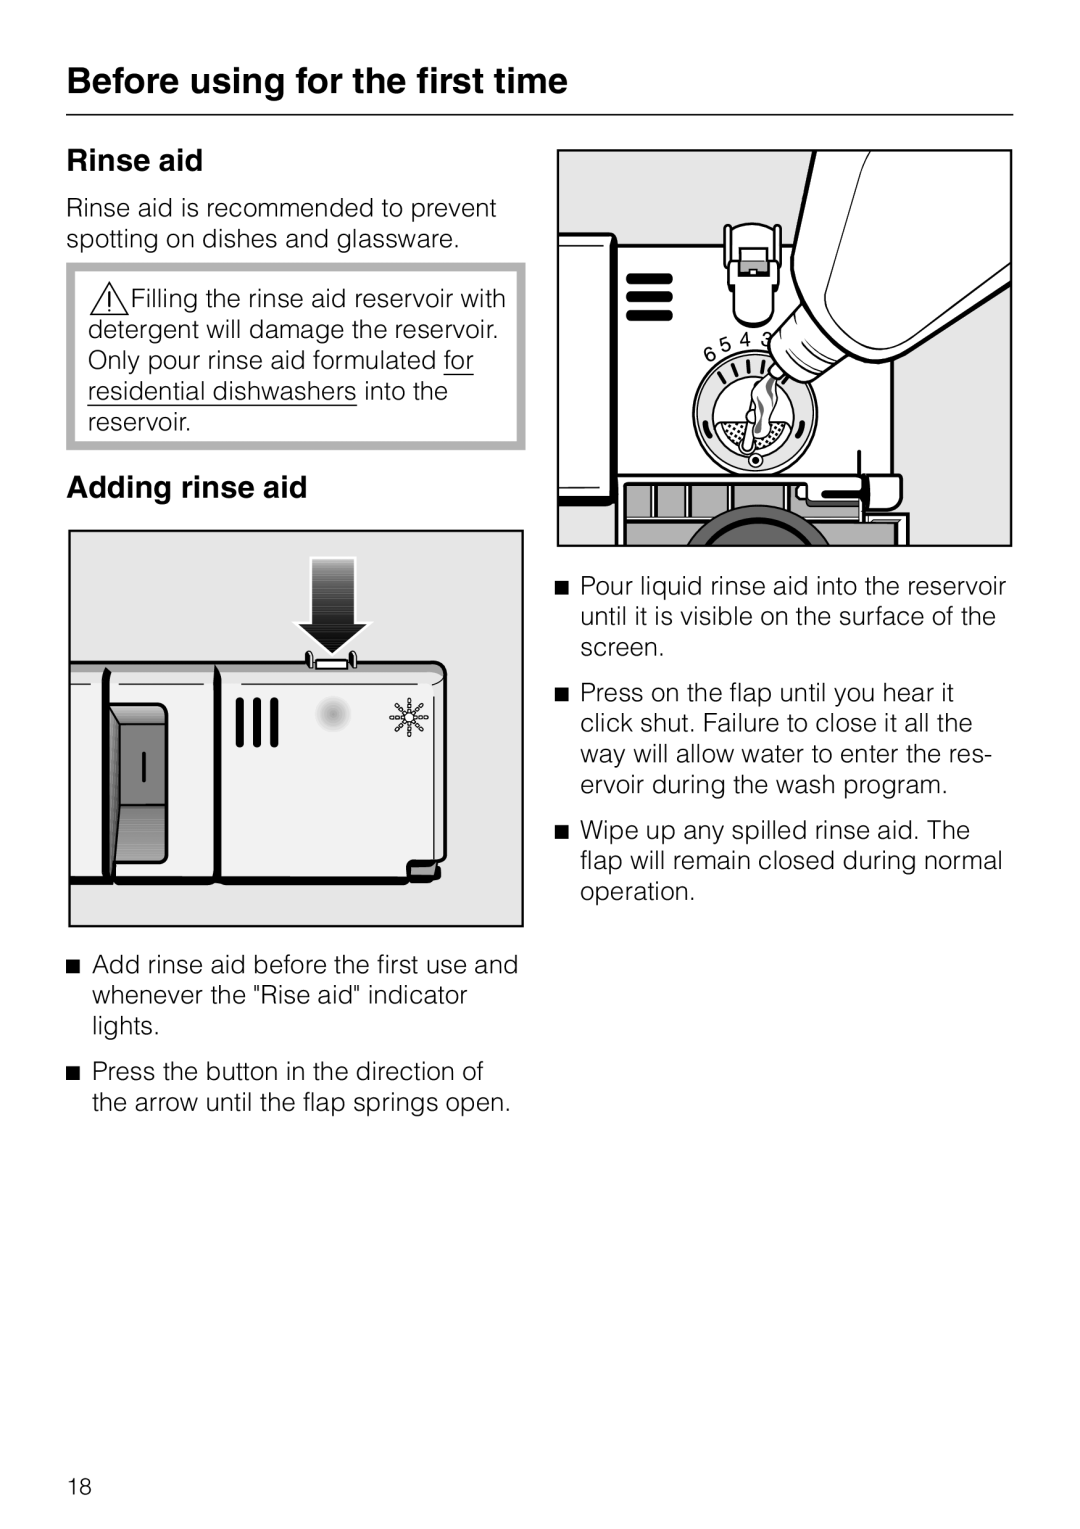 Miele G 851 operating instructions Rinse aid, Adding rinse aid, Before using for the first time 